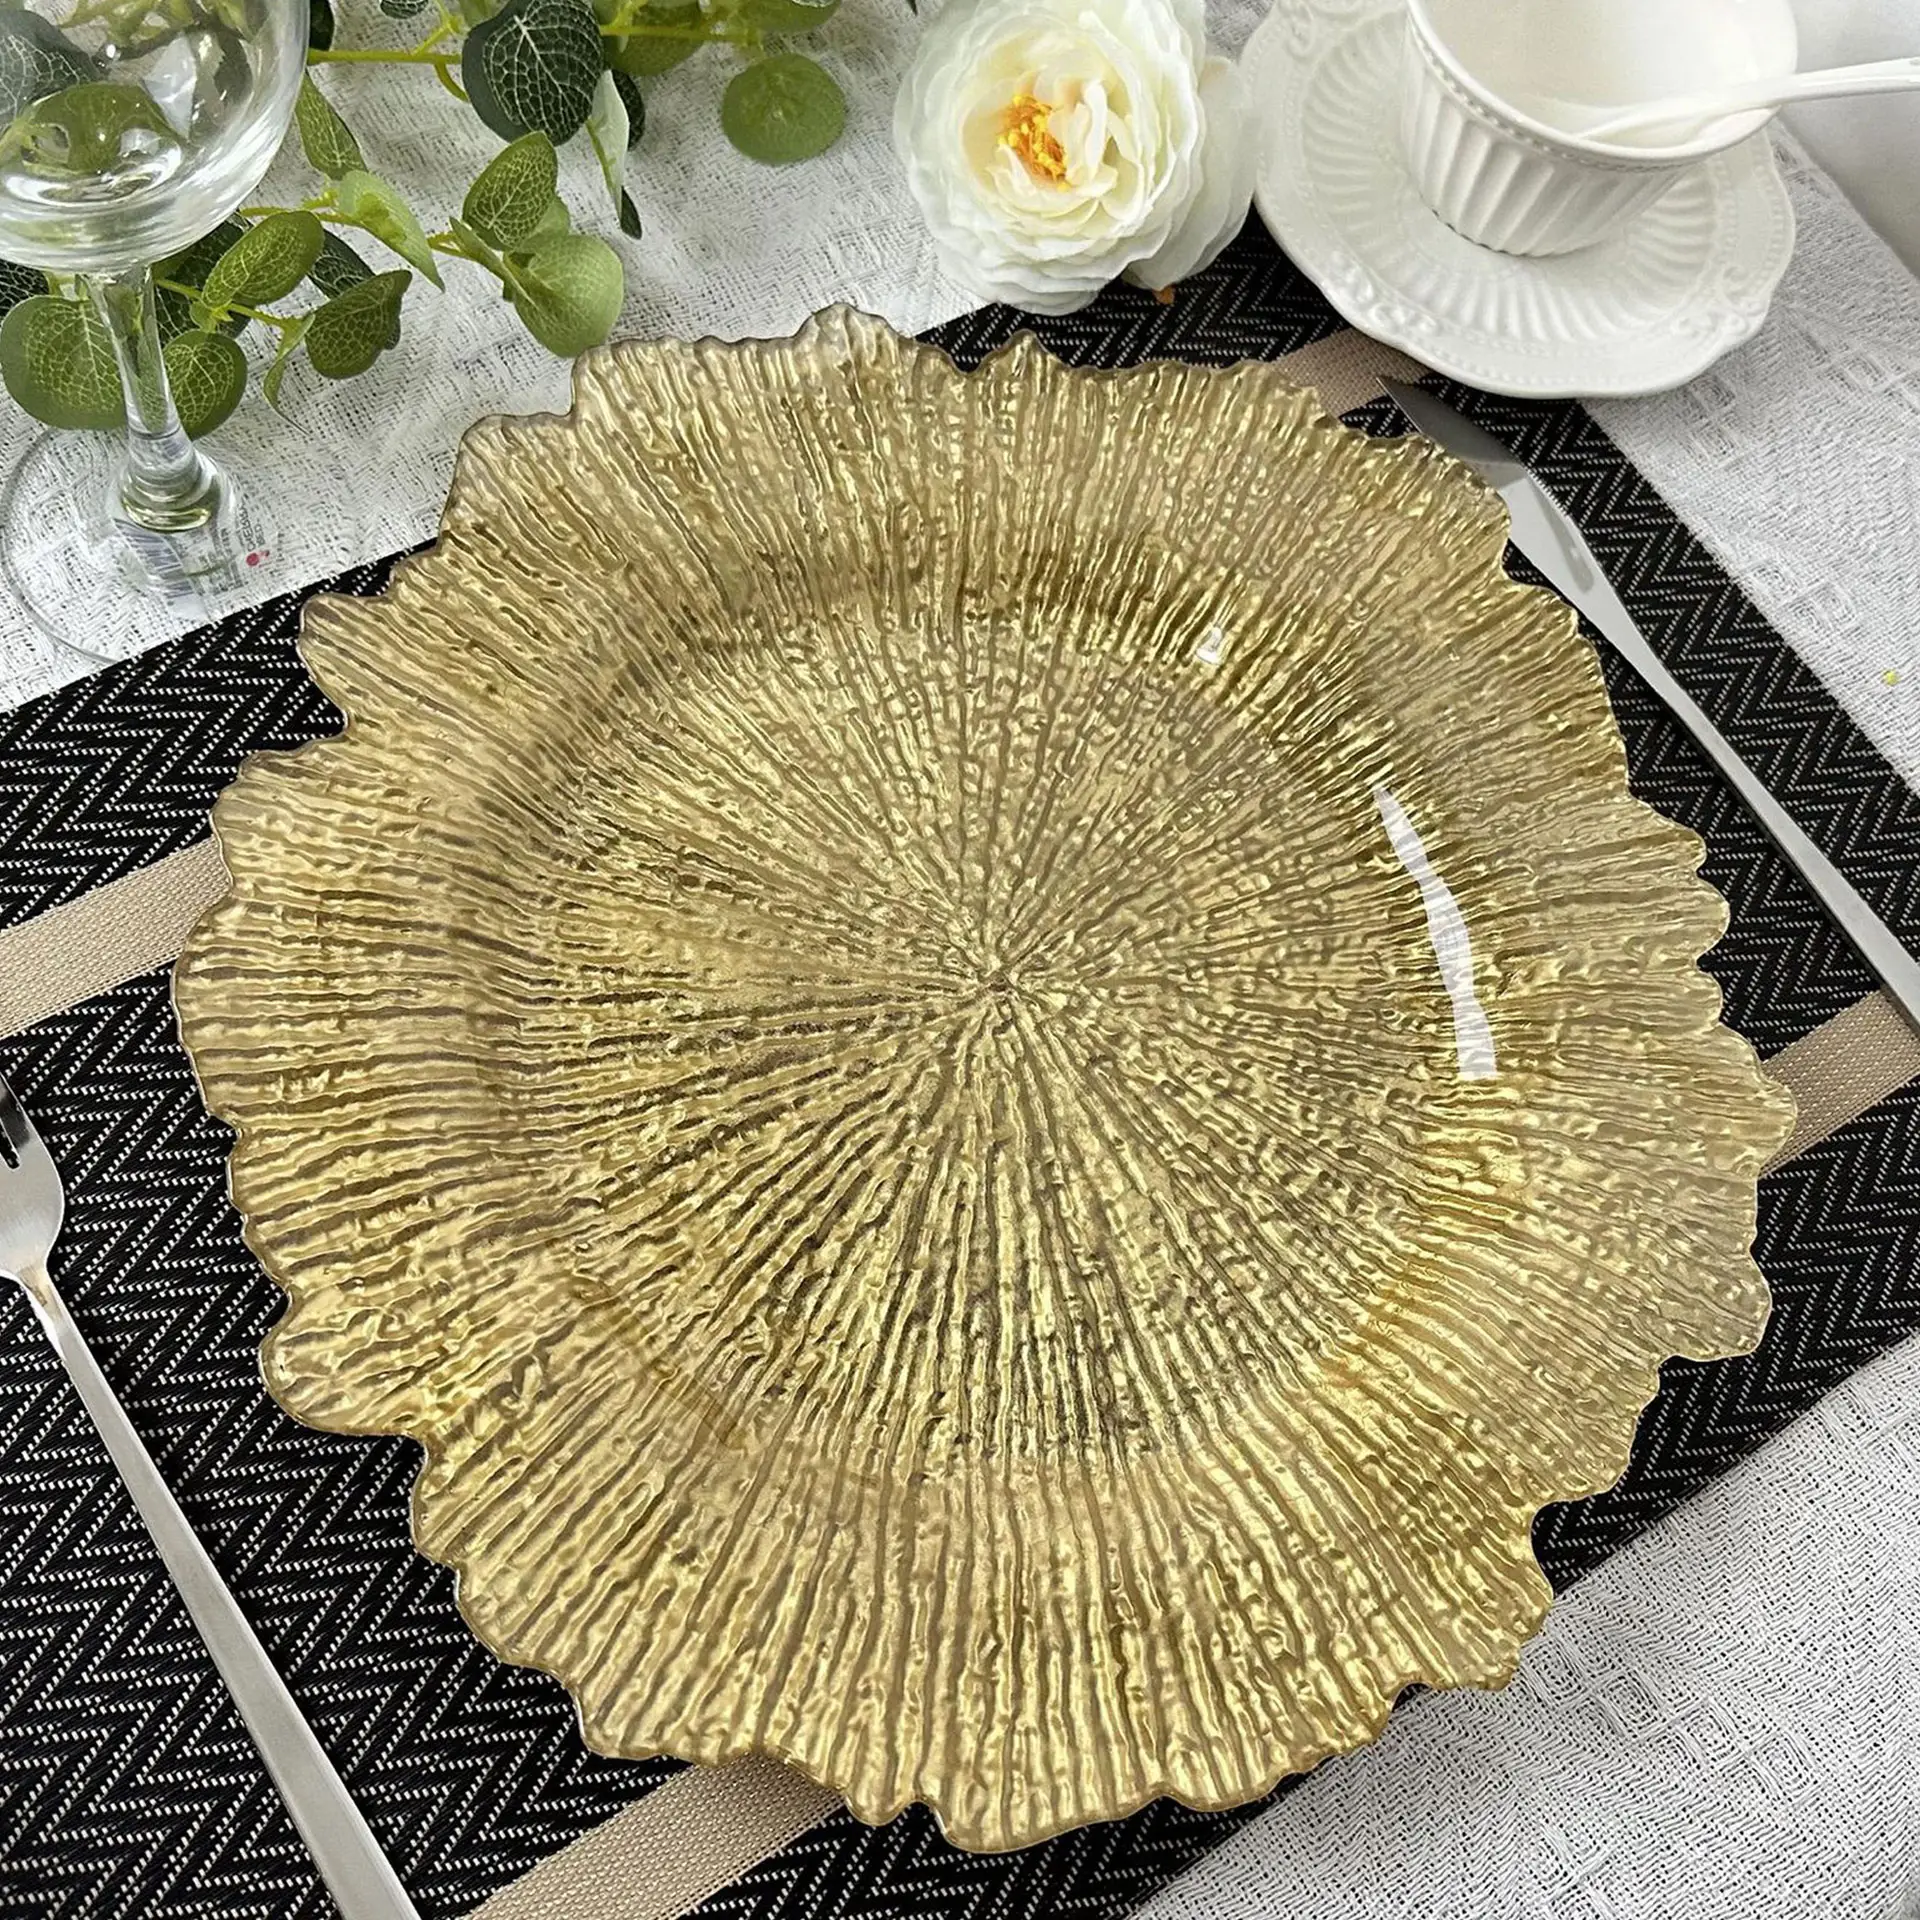 Wholesale 13 inch Gold Reef Charger Plates Plastic Dinner Party Table Chargers Under Plates Wedding Event Golden Charger Plates